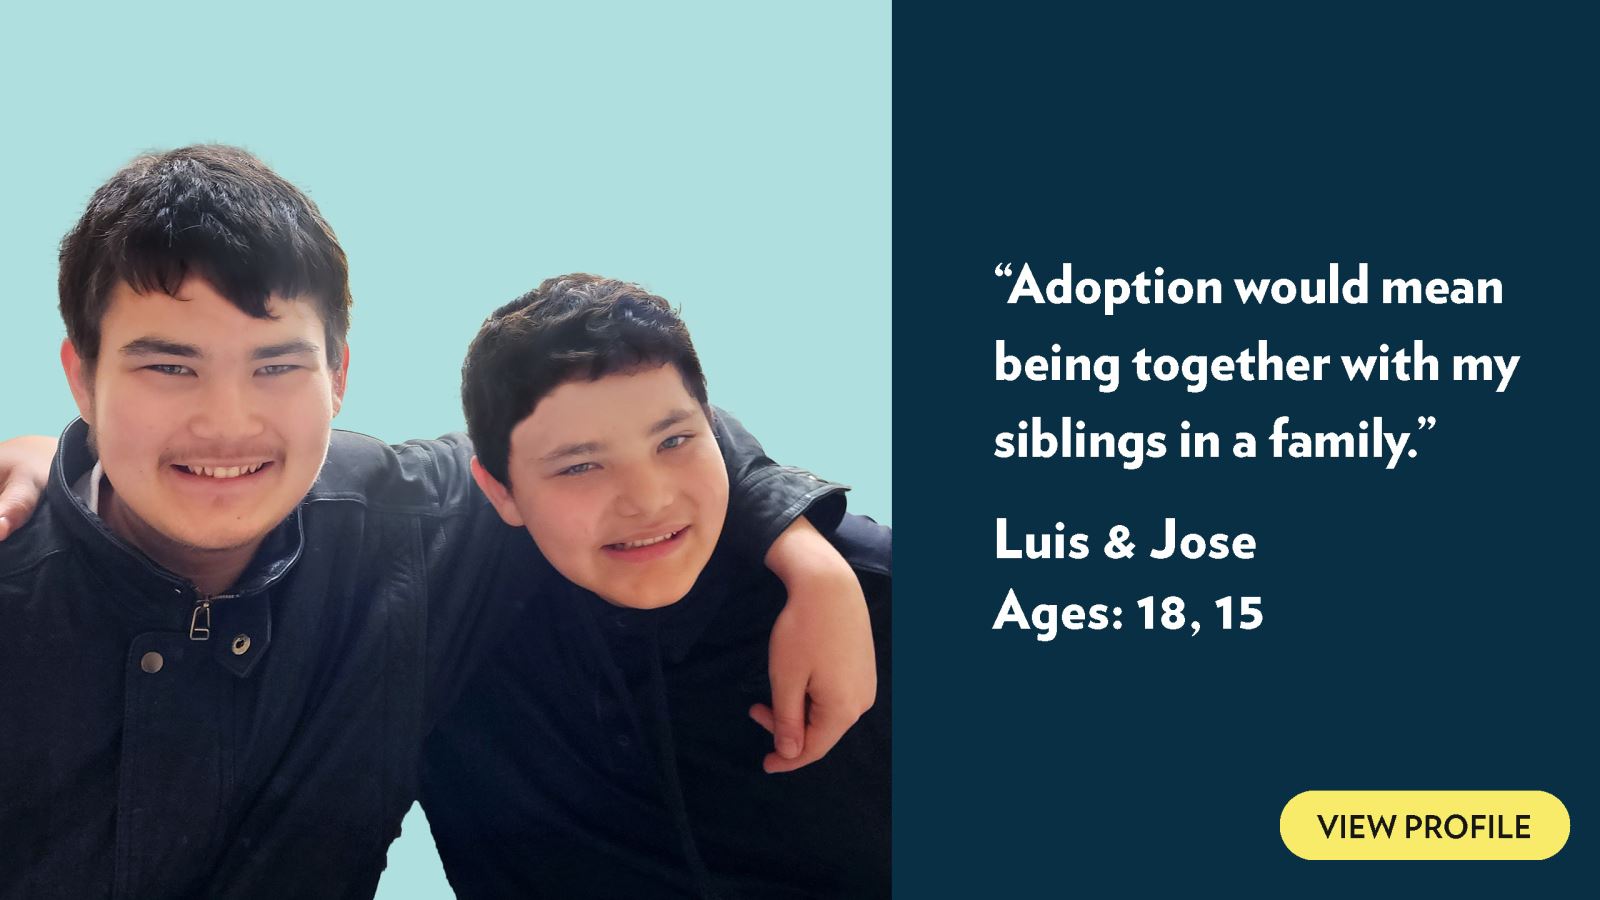 Adoption would mean being together with my siblings in a family. Luis and Jose, ages 18 and 15. View profile.